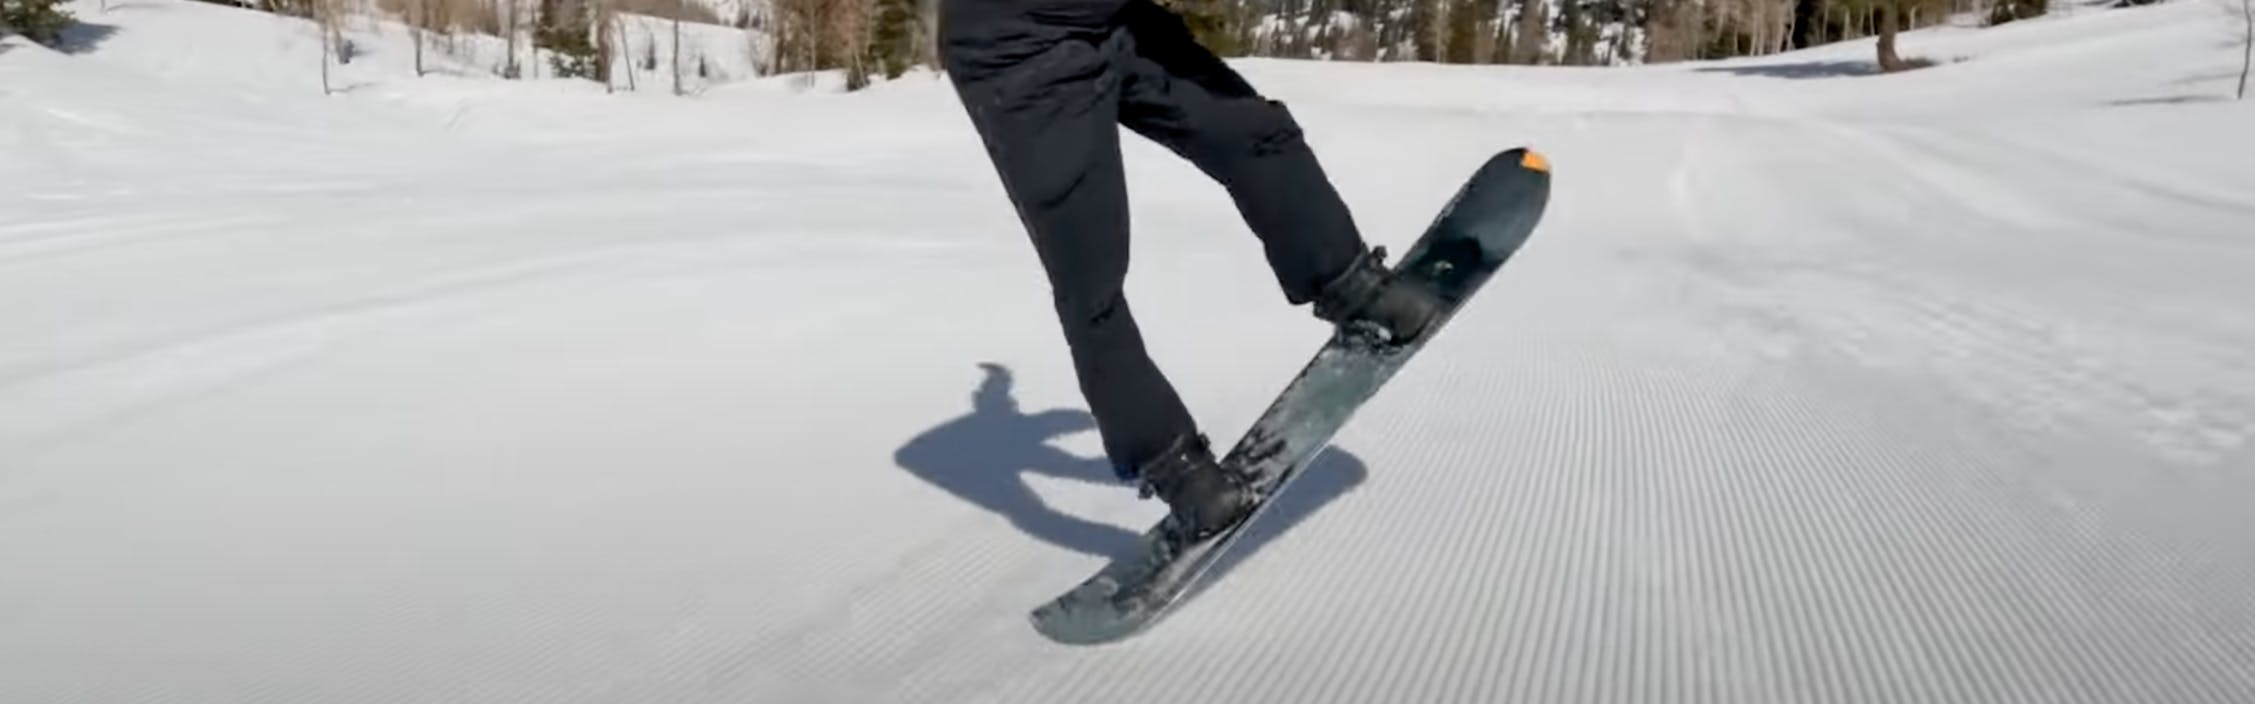 A snowboarder doing a trick. 